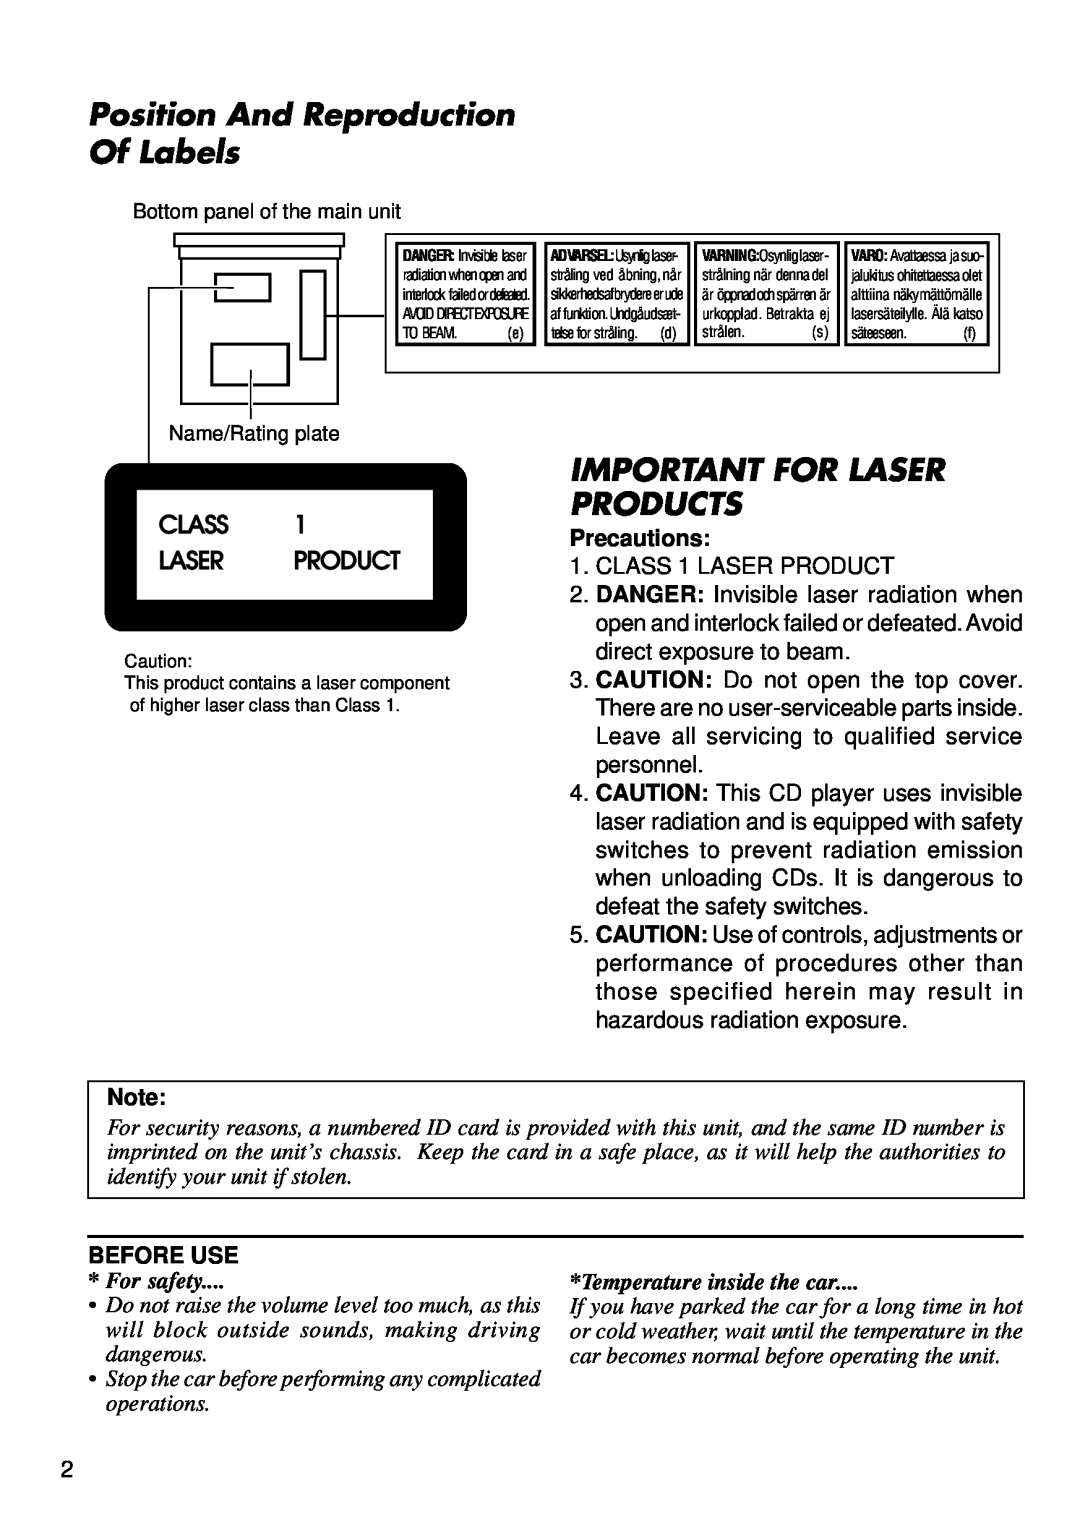 JVC KD-S707R, KD-S737R Position And Reproduction Of Labels, Important For Laser Products, Class Laser Product, Precautions 